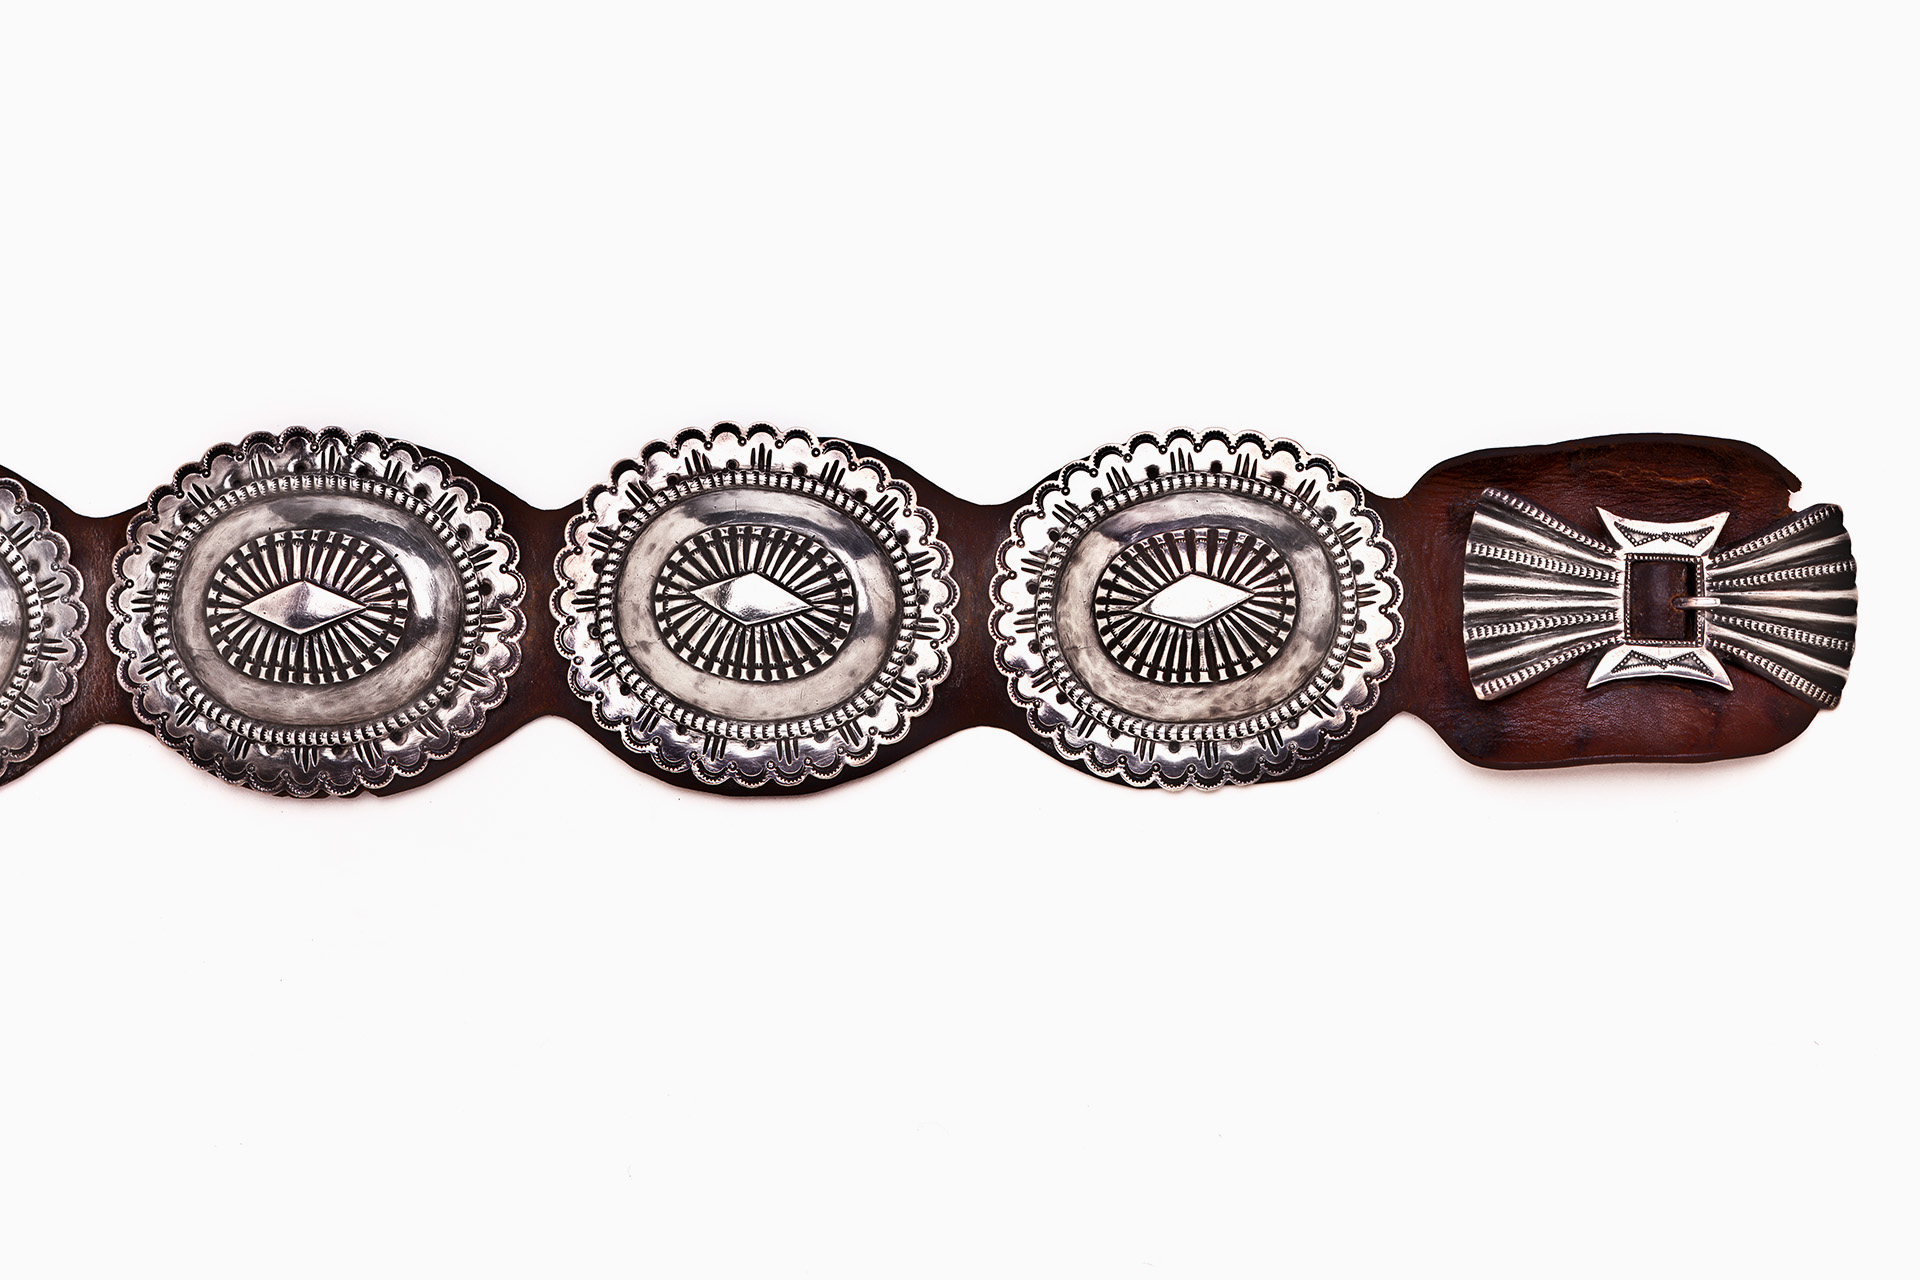 A silver and brown belt with a design on it.